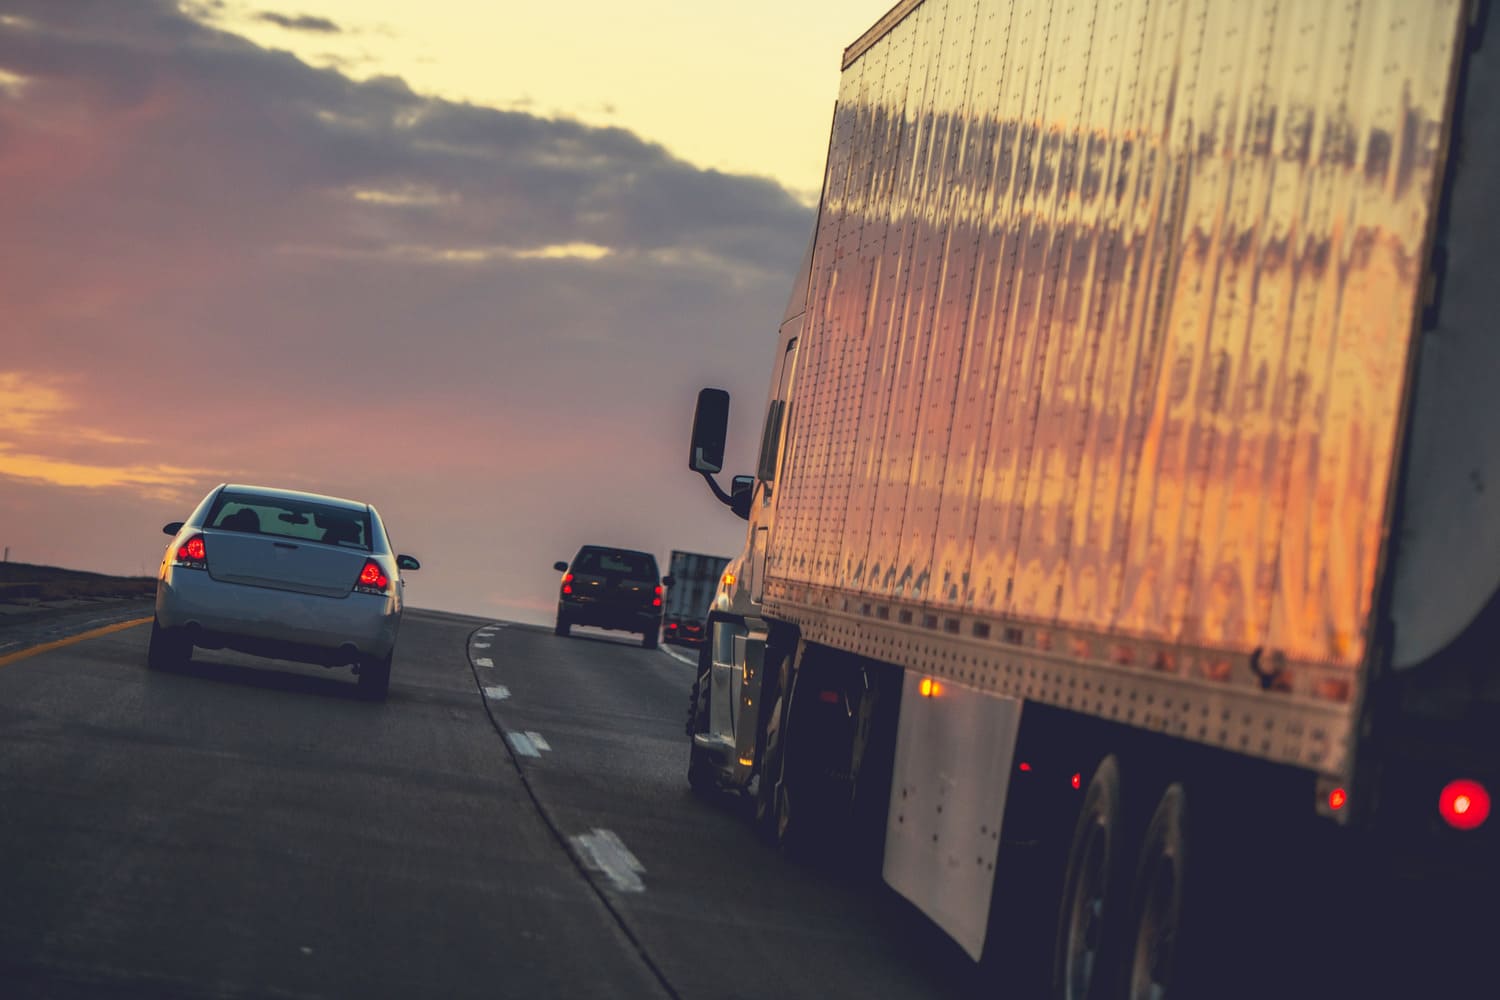 18-Wheeler Truck Accident Attorneys - AMS Law